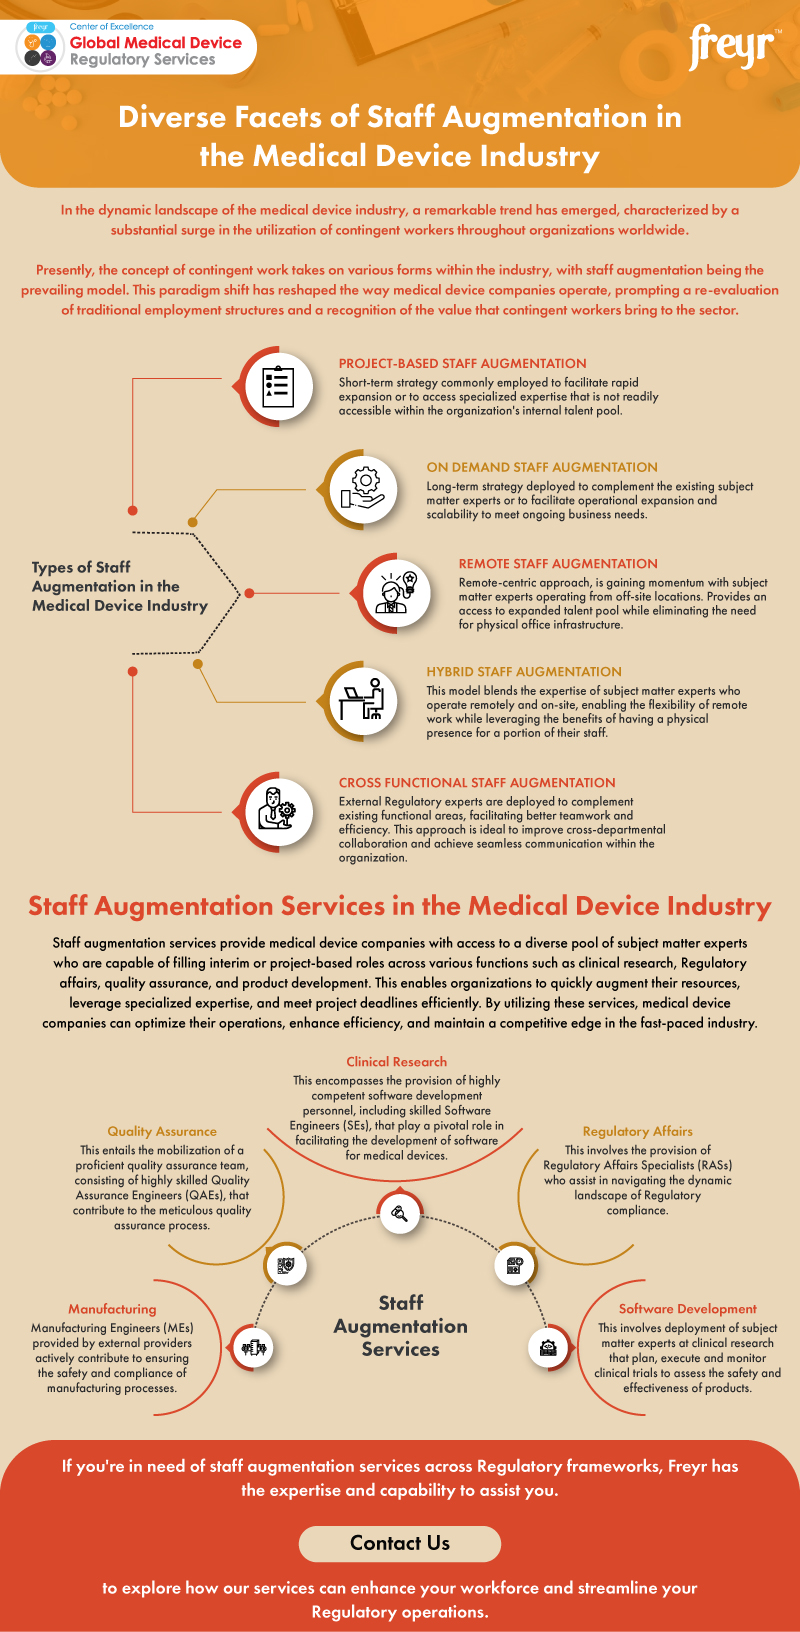 Diverse Facets of Staff Augmentation in the Medical Device Industry